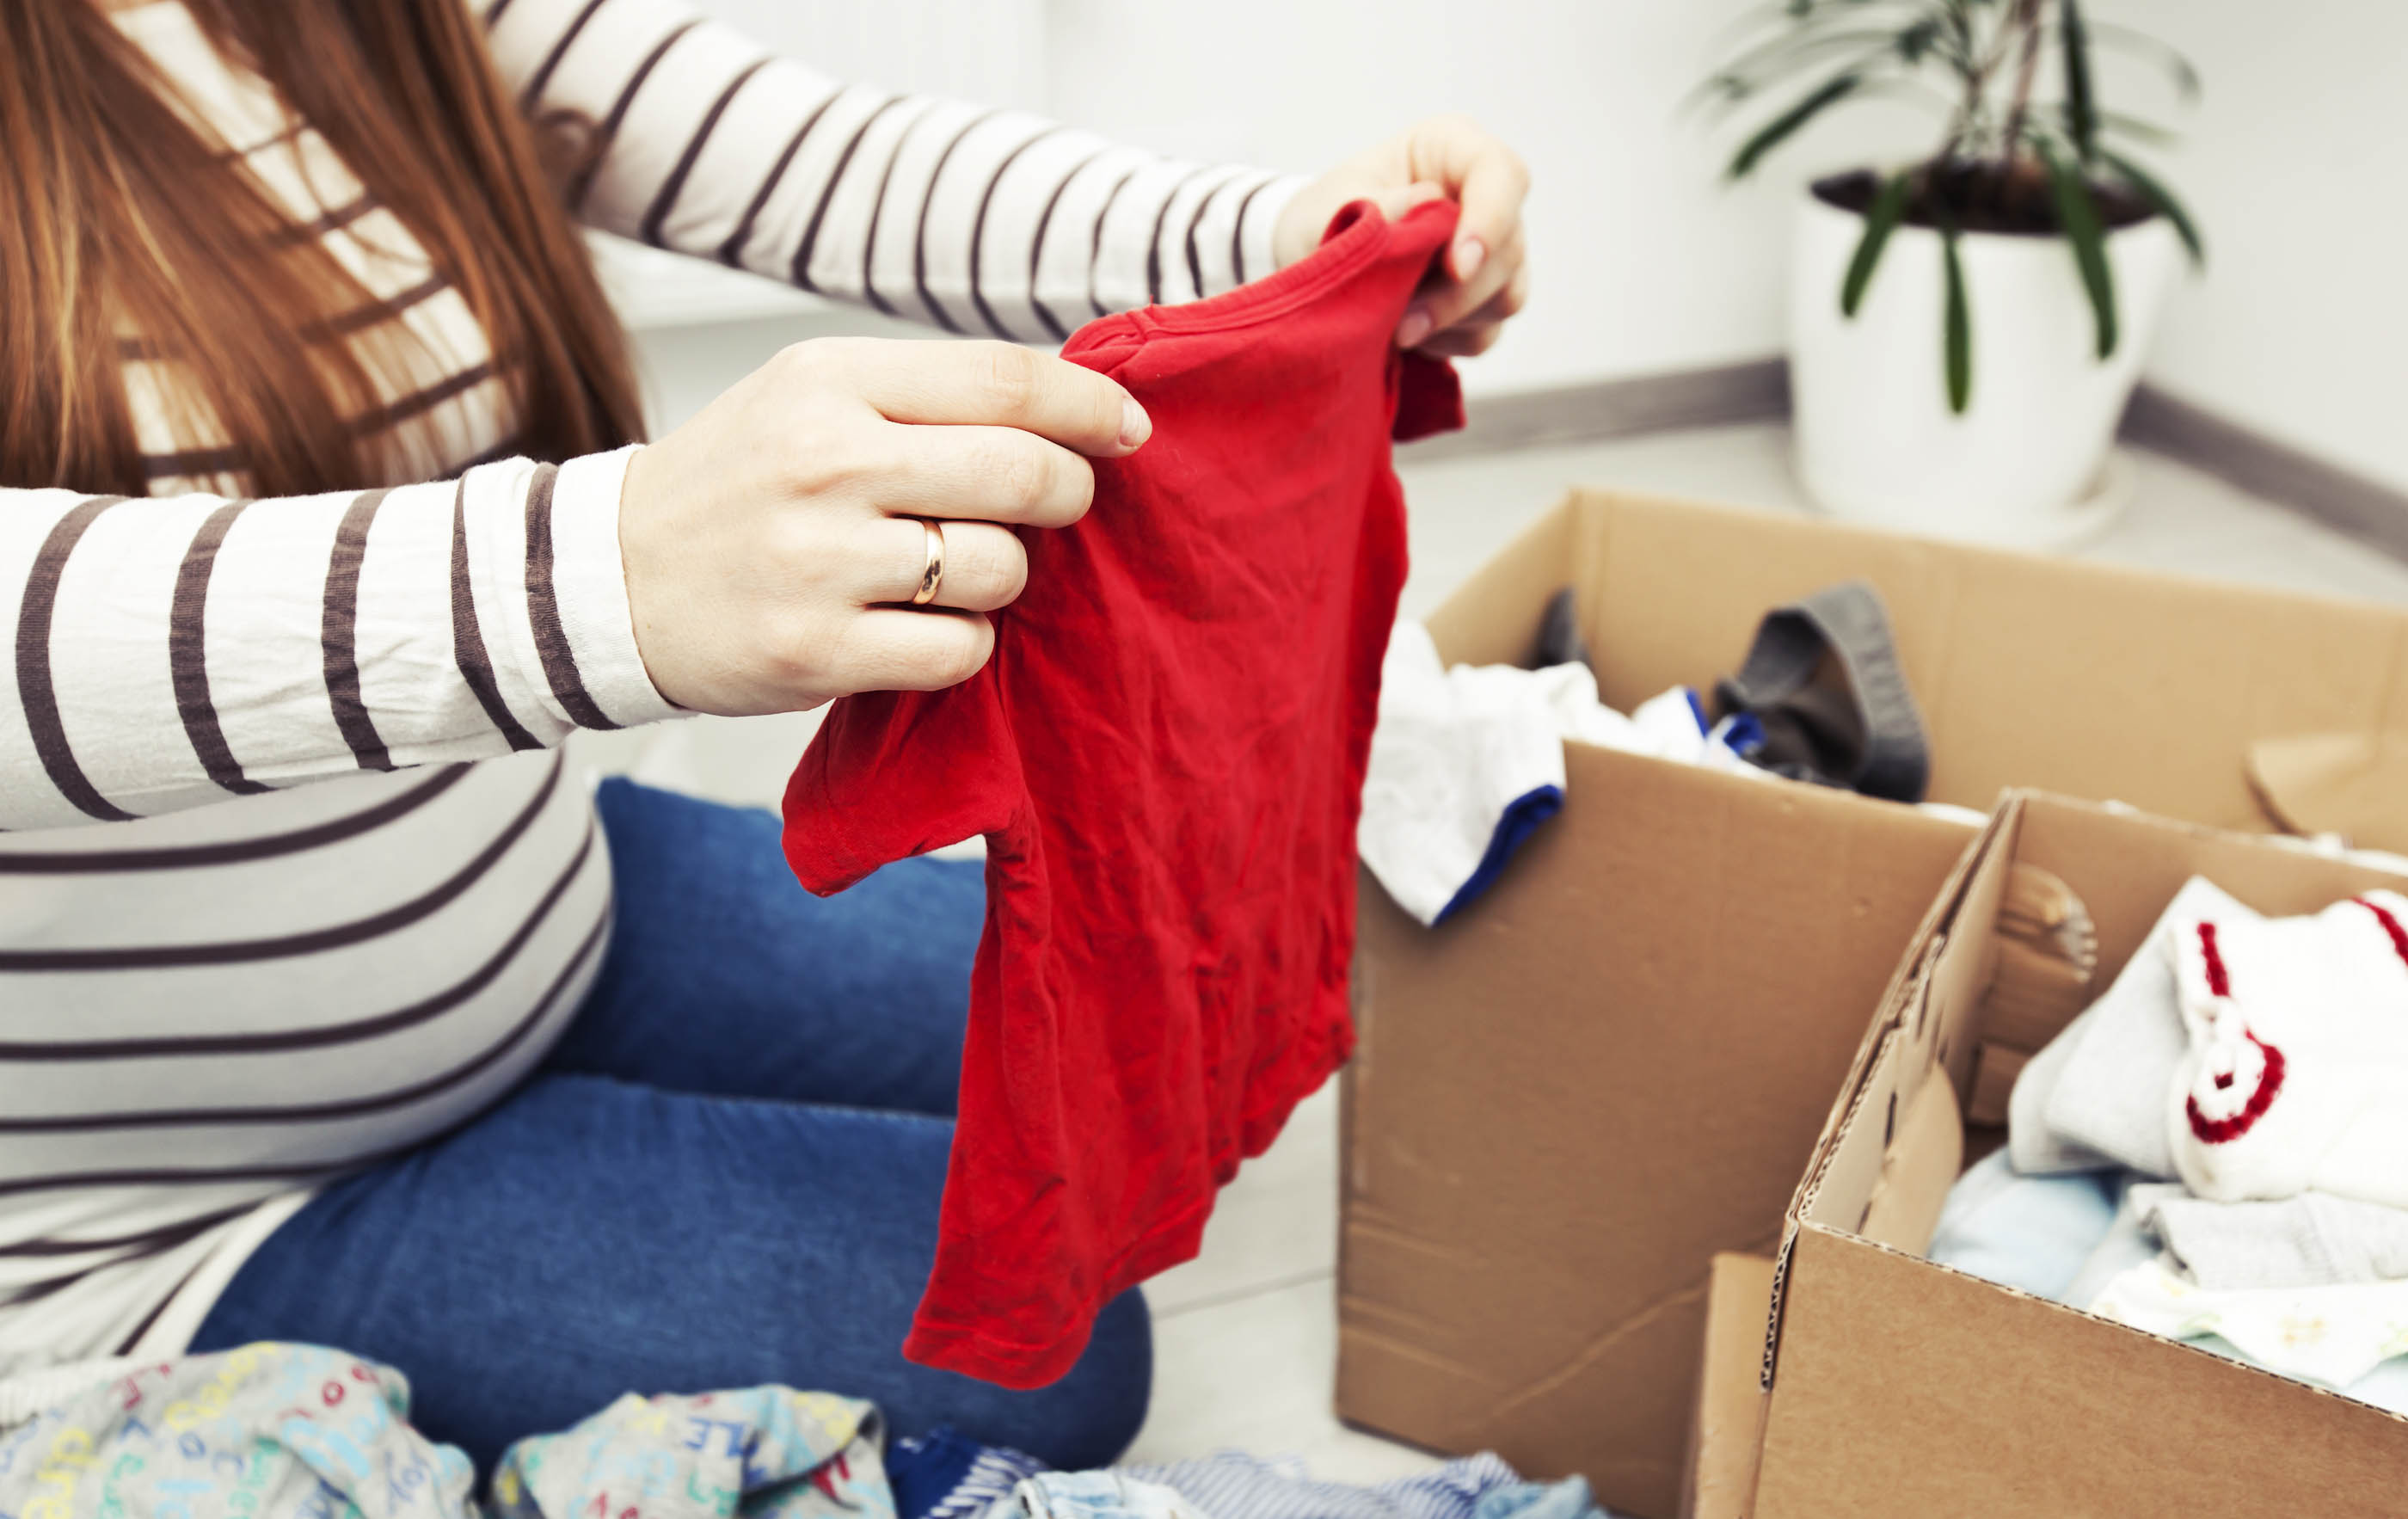 Sorting out second hand baby clothes (Image: SkyLine/Adobe Stock) 